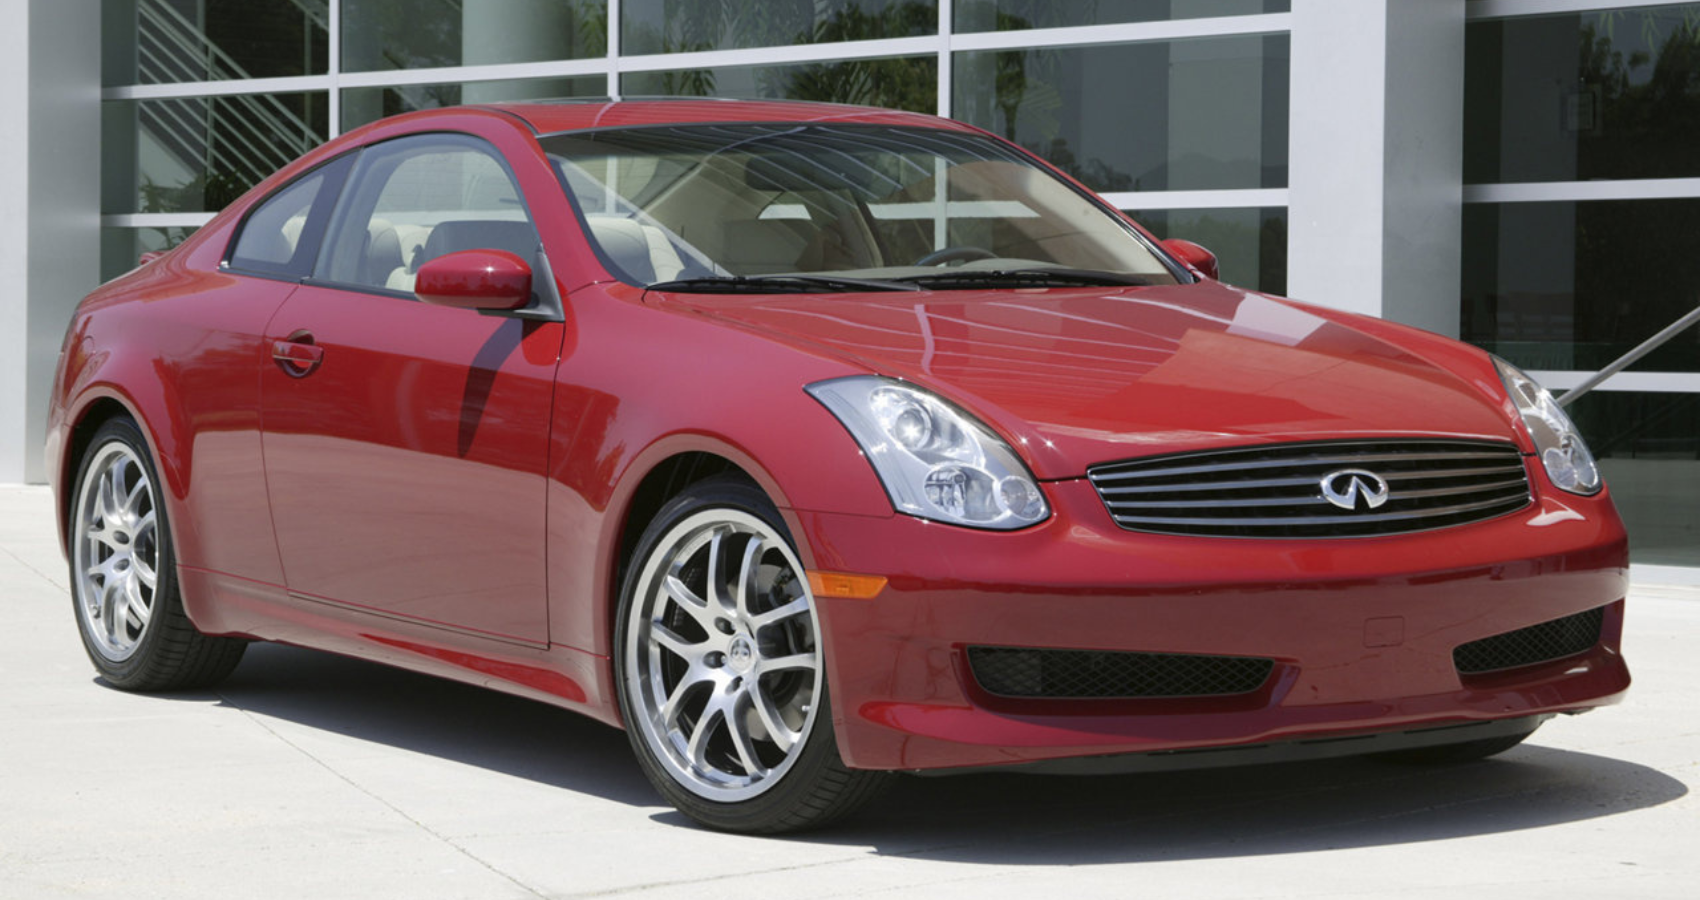 2006 Infiniti G35 Coupe red sports car